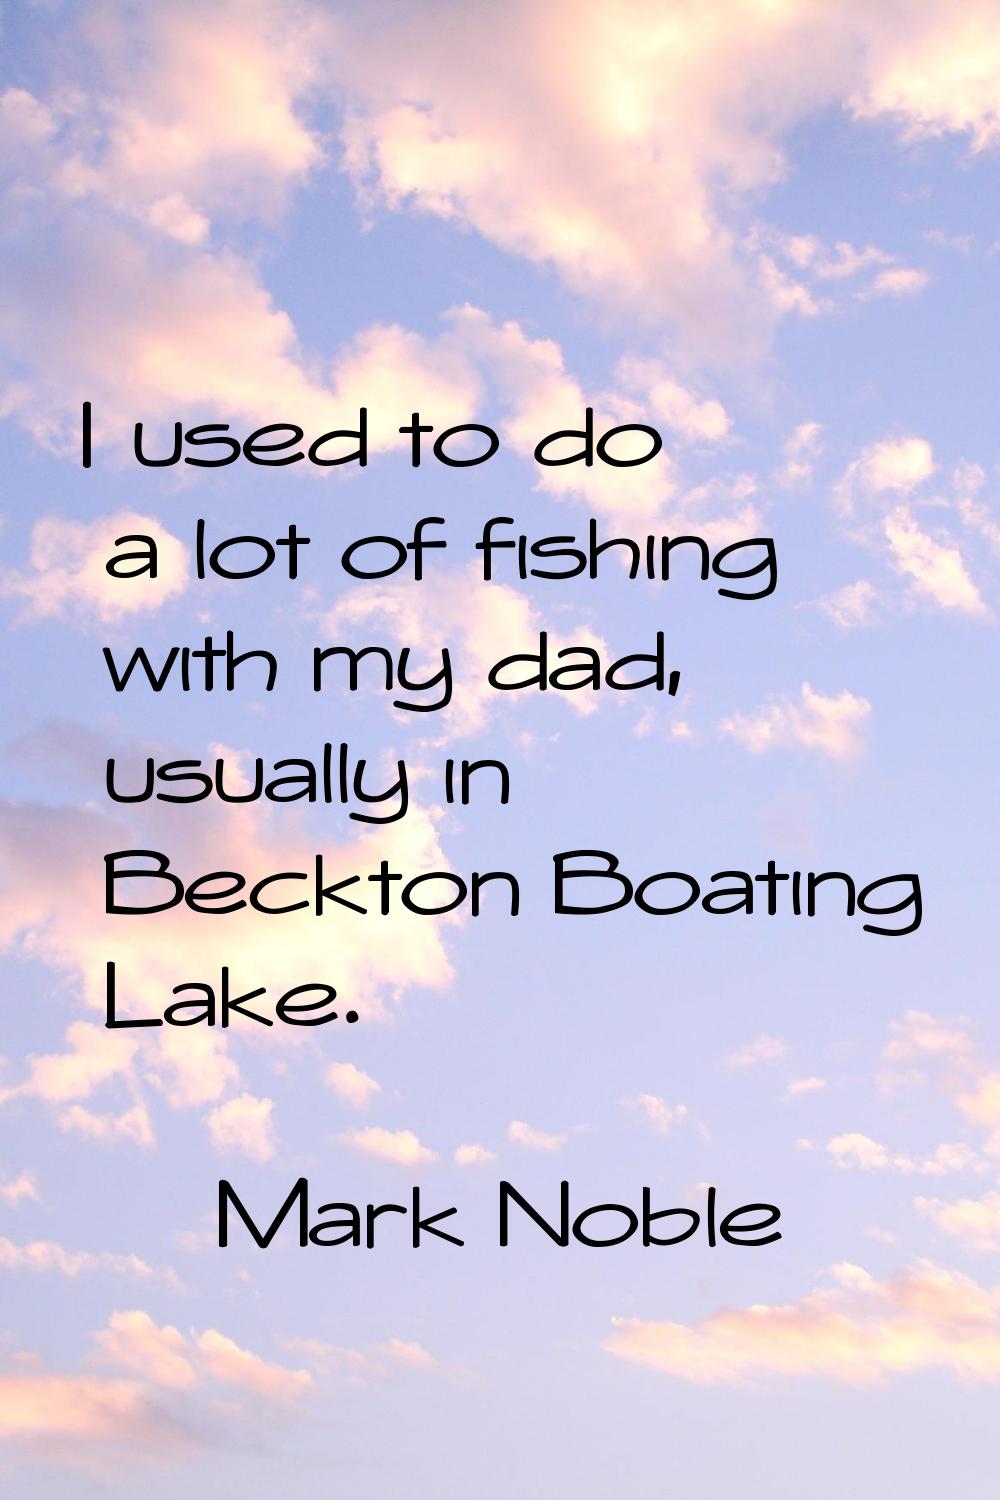 I used to do a lot of fishing with my dad, usually in Beckton Boating Lake.